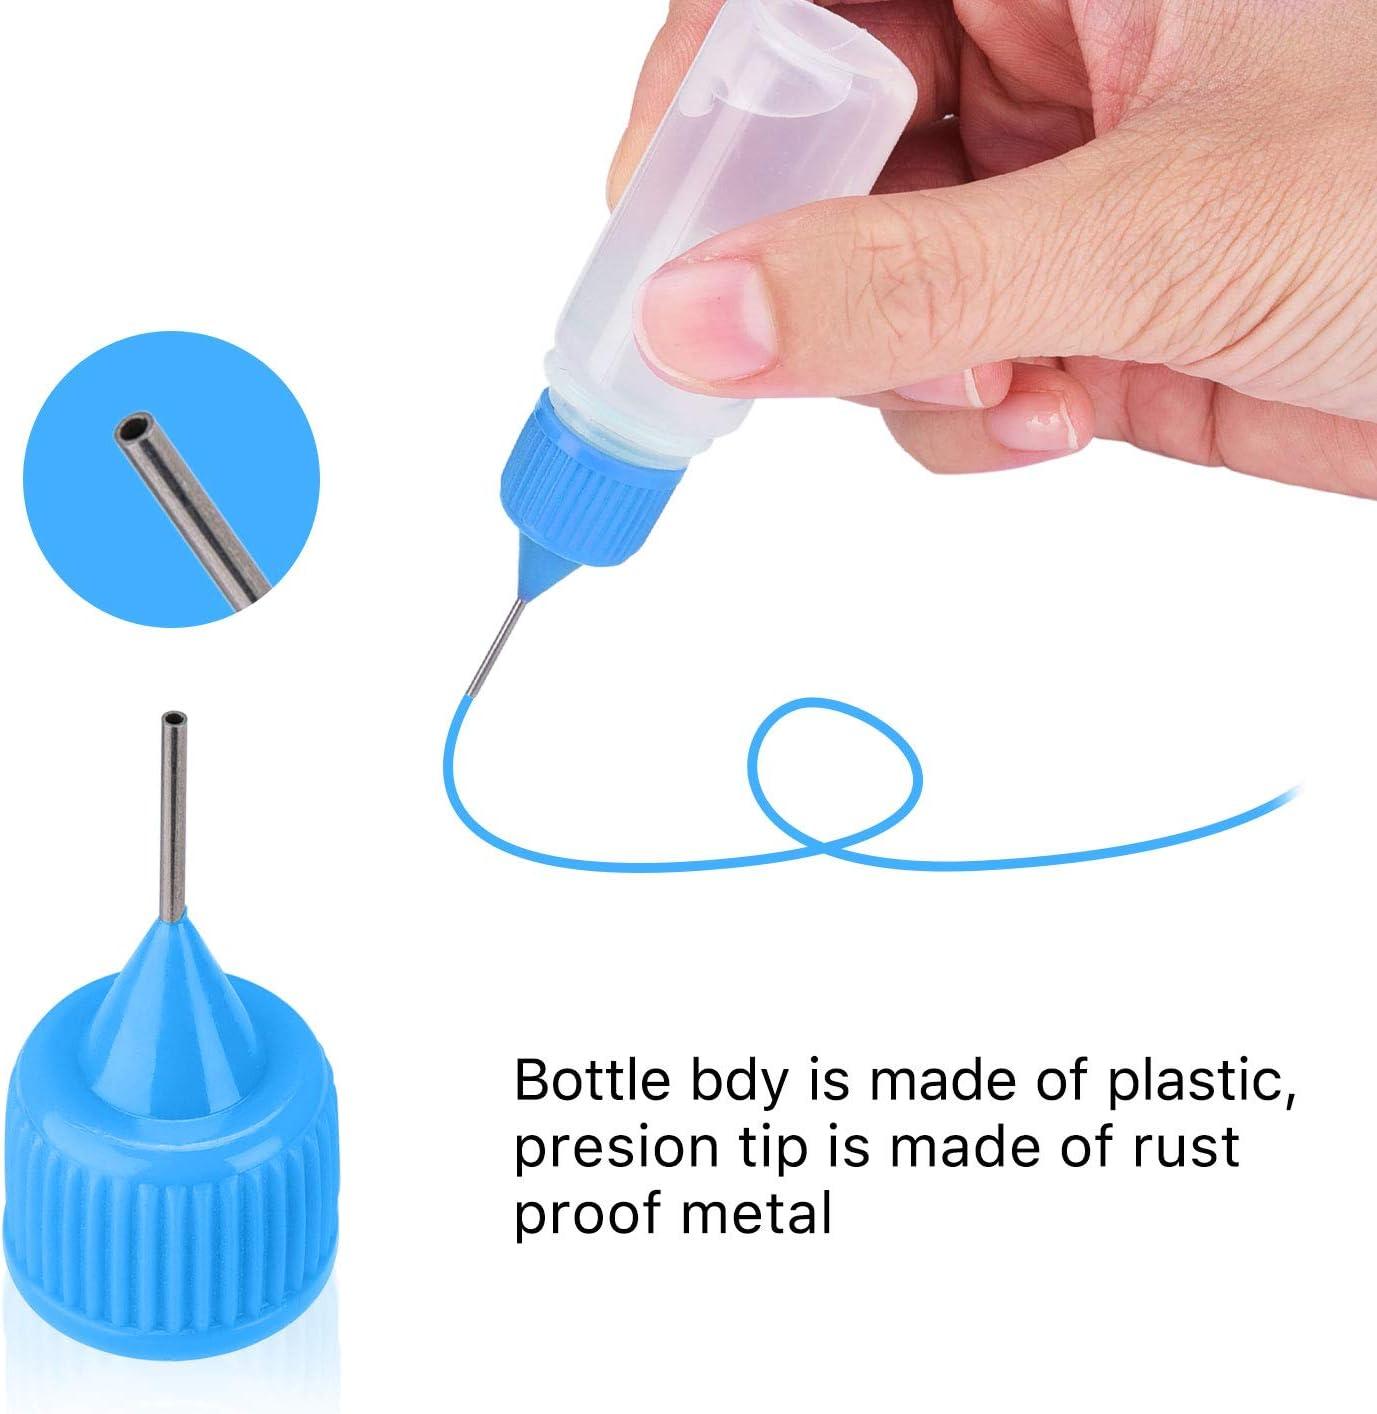 Needle Tip Bottle 10 Pcs Needle Tip Glue Bottle Applicator Multi-Purpose  Use Glue Bottles for Paint Quilling Craft Paper Crafts attractive